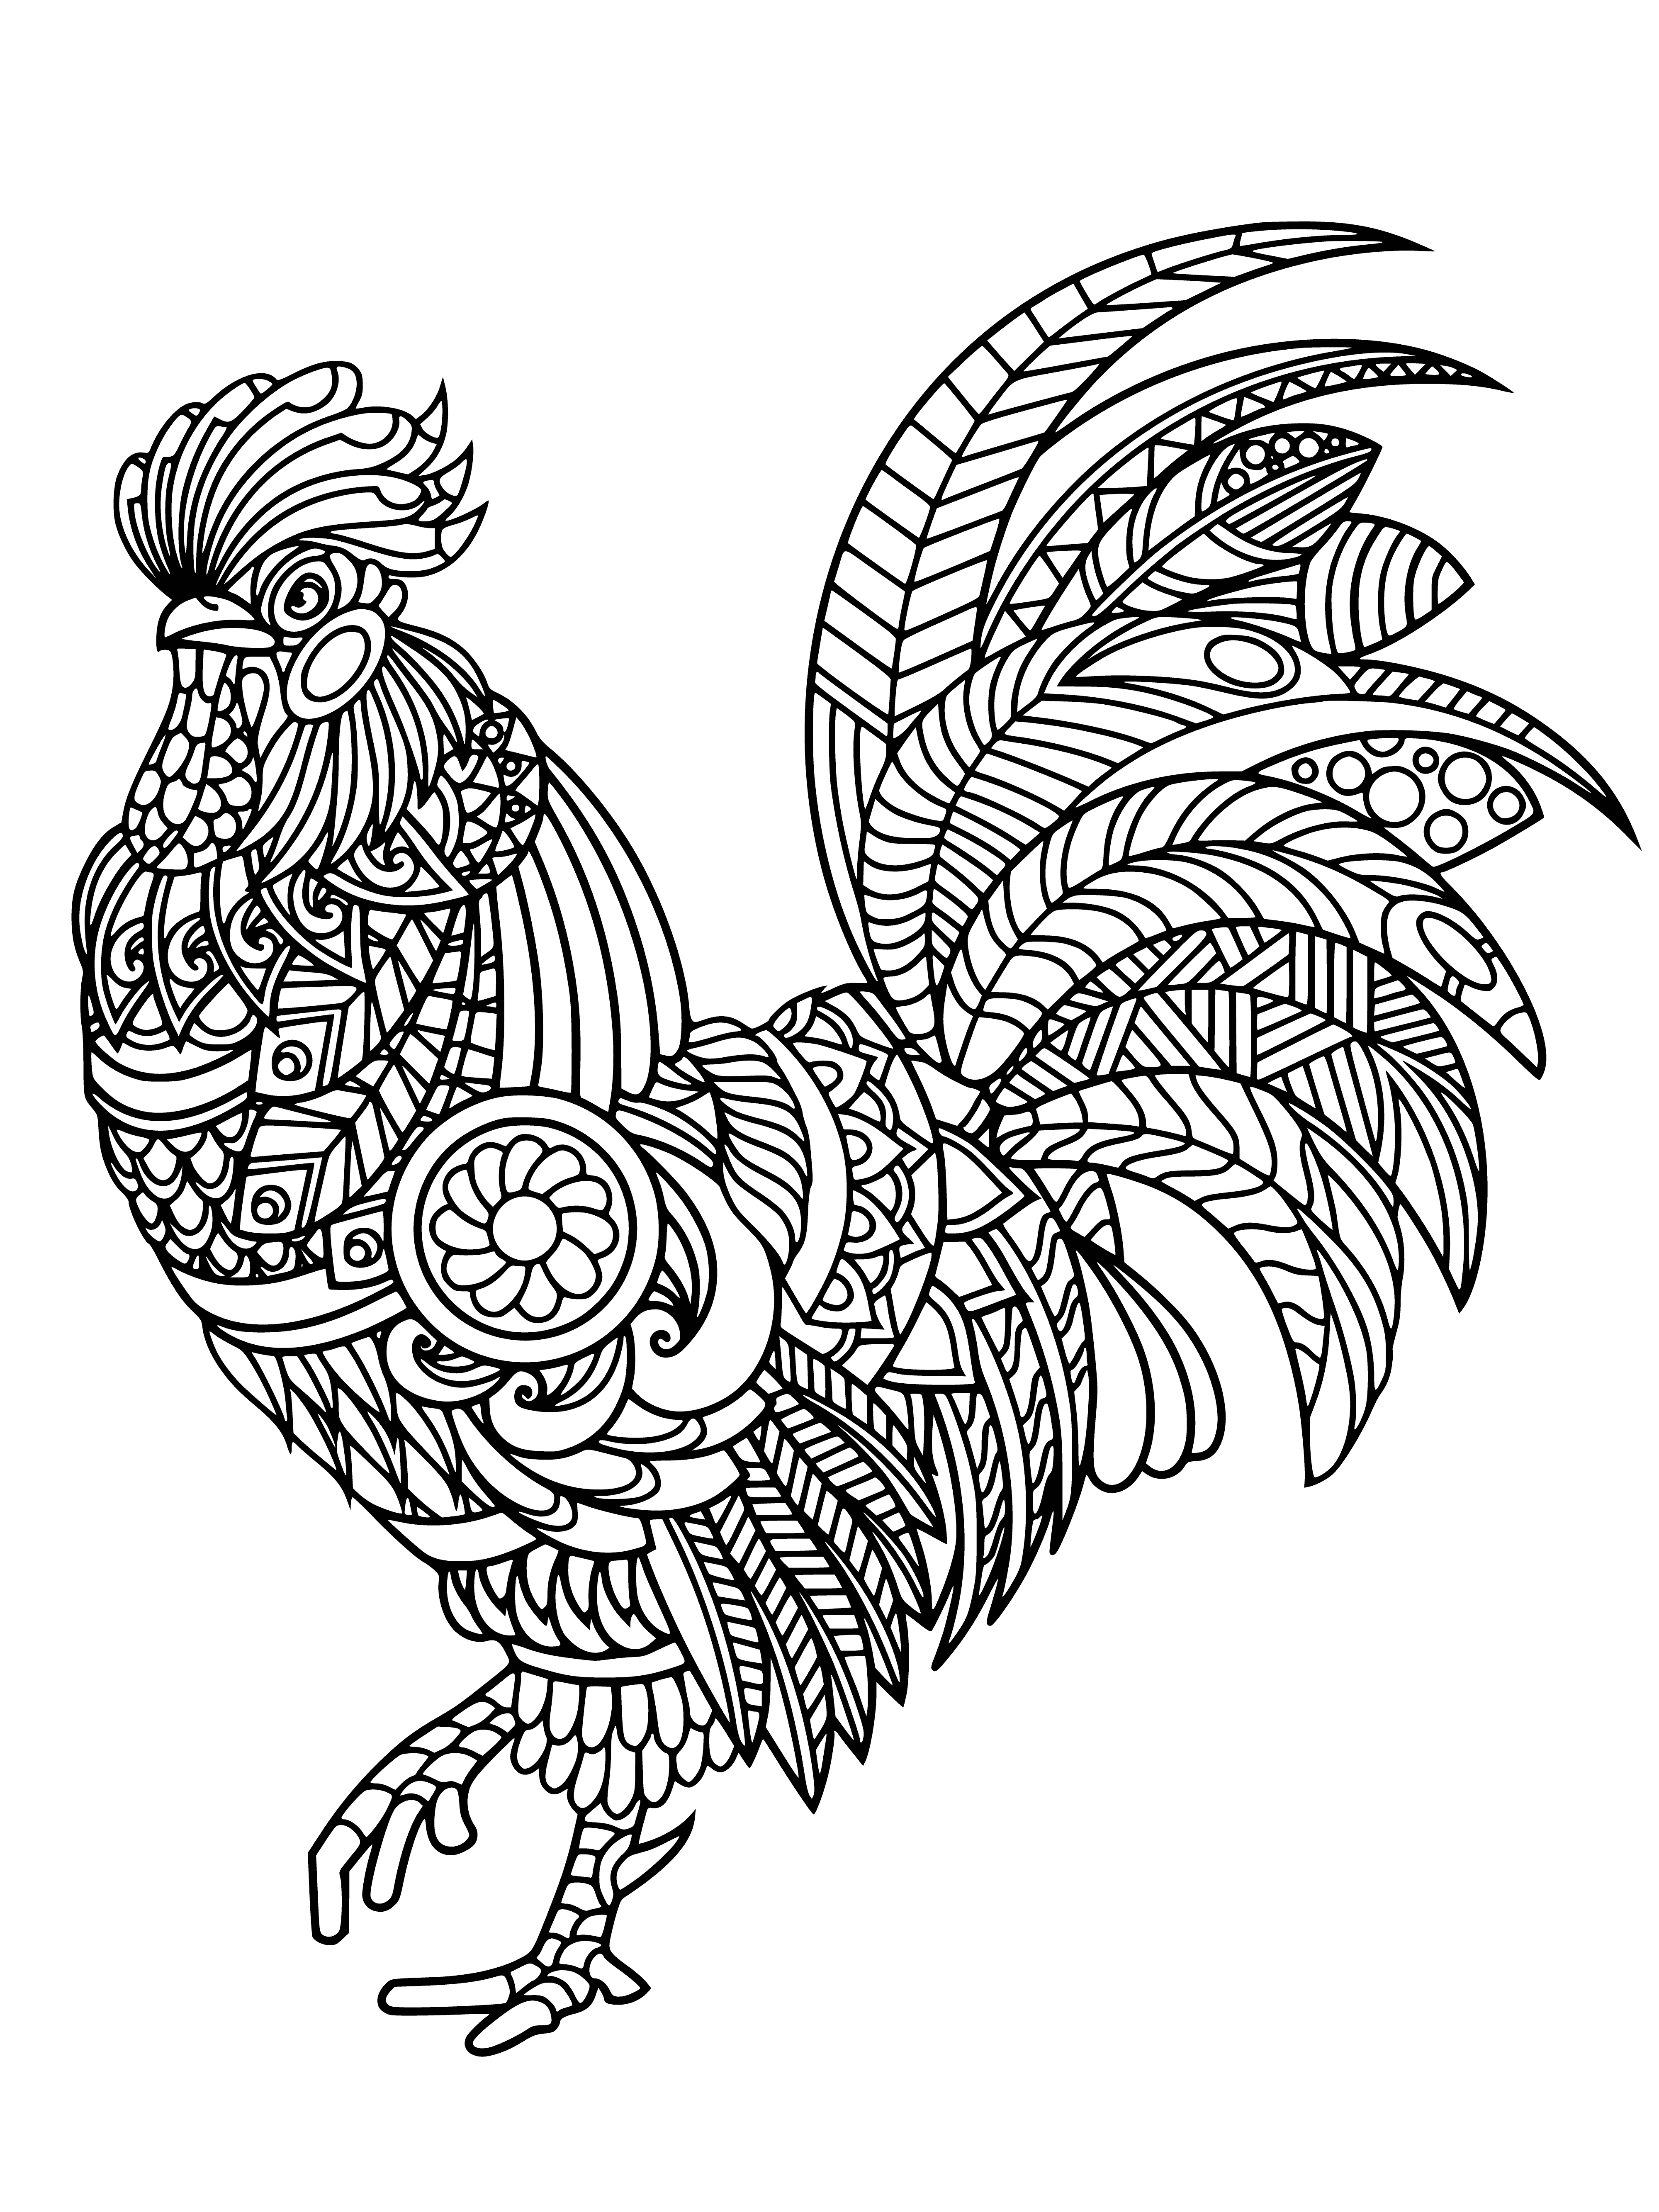 coloring page: Coloring page of a rooster on a fence surrounded by trees and leaves. Perfect for relaxing and relieving stress.